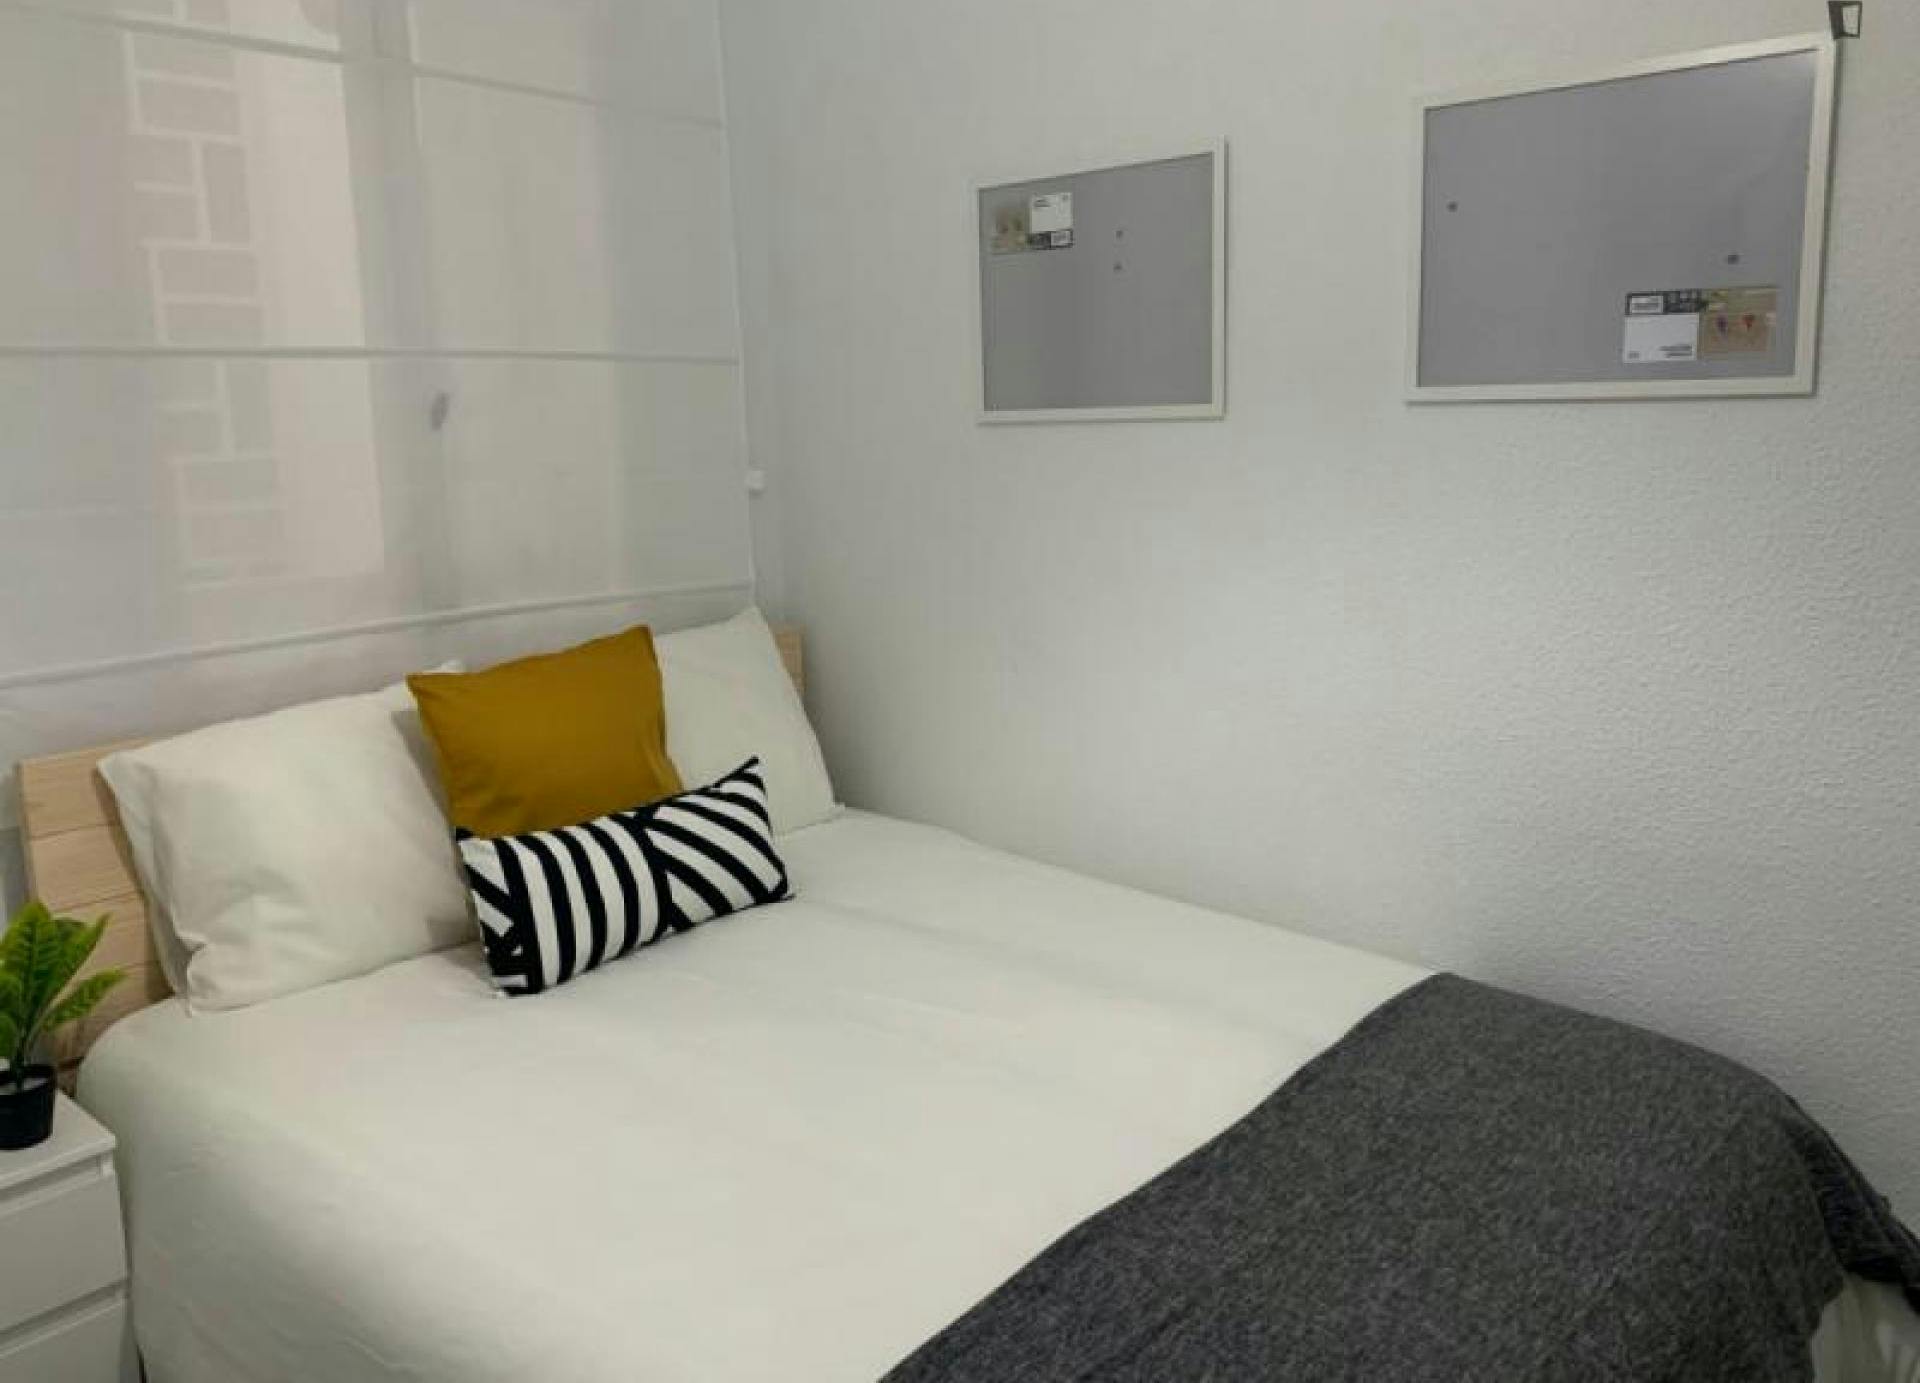 Double bedroom in a 3-bedroom apartment near Parc lo Morant